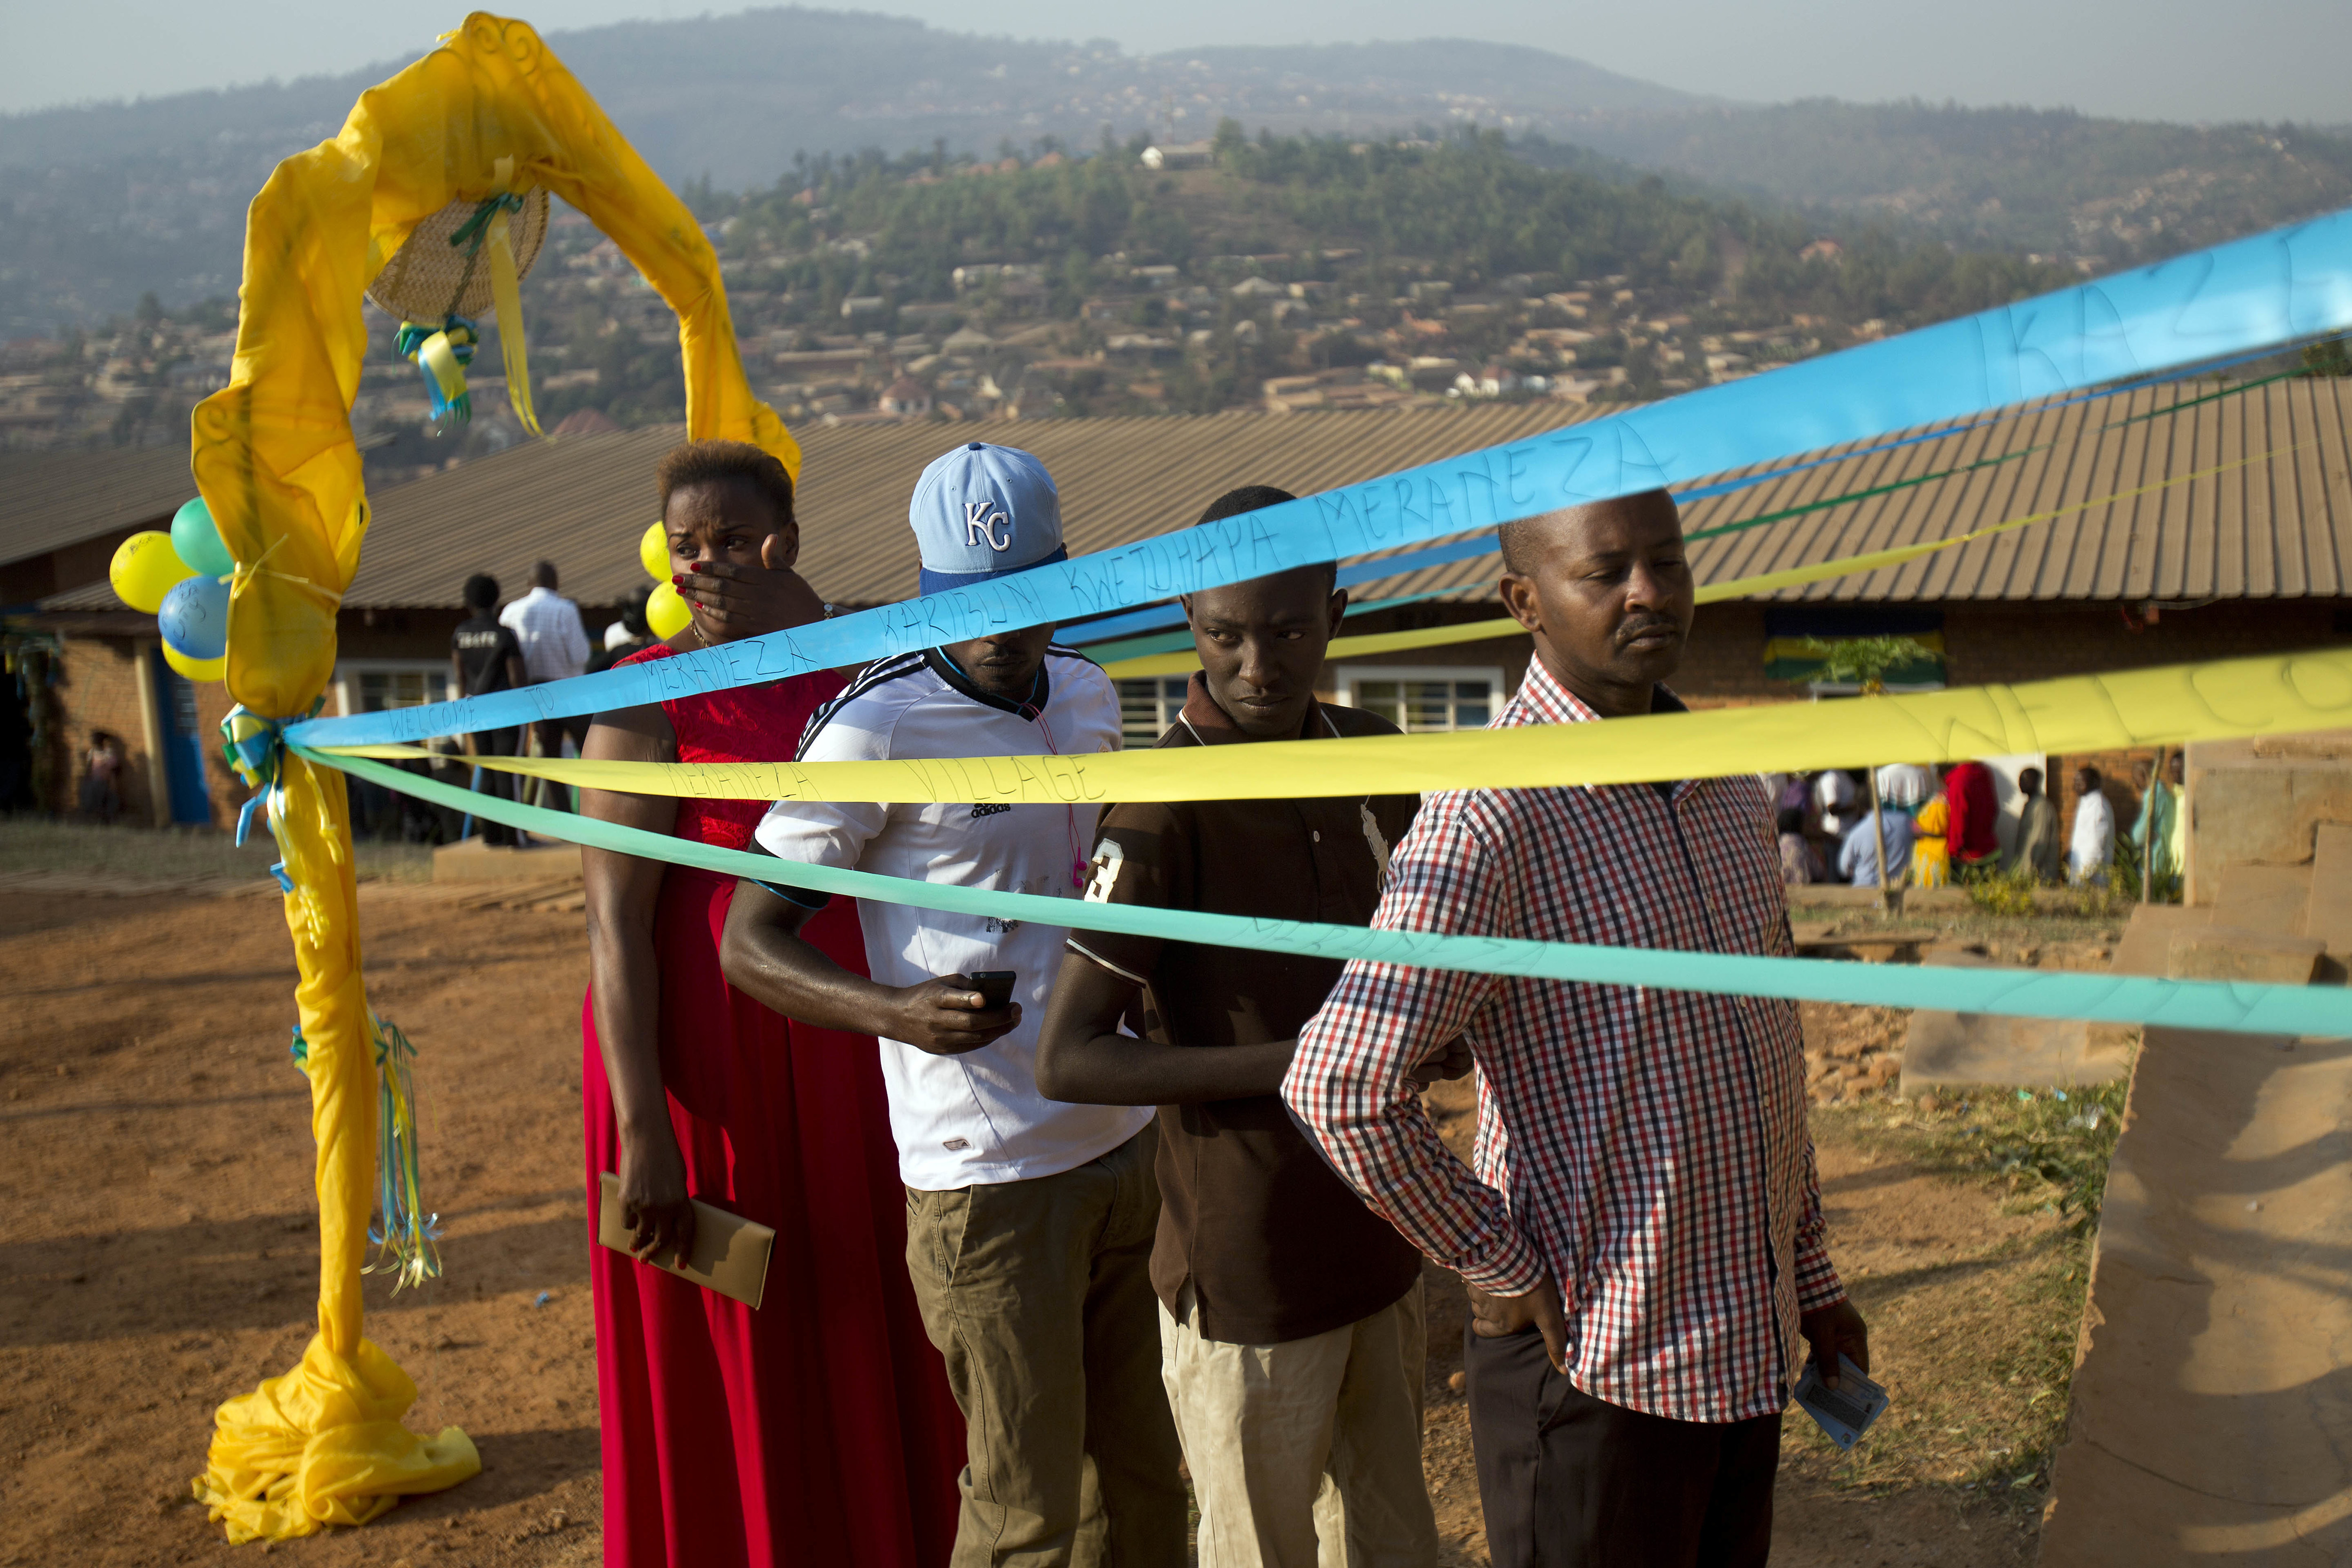 Voters line up to cast their vote at a polling station for the presidential election, Friday Aug. 4, 2017, in the capital Kigali, Rawanda. Incumbent President Paul Kagame is widely expected to win another term after the government disqualified three potential candidates for allegedly failing to fulfill certain requirements, including collecting enough signatures. (AP Photo/Jerome Delay)